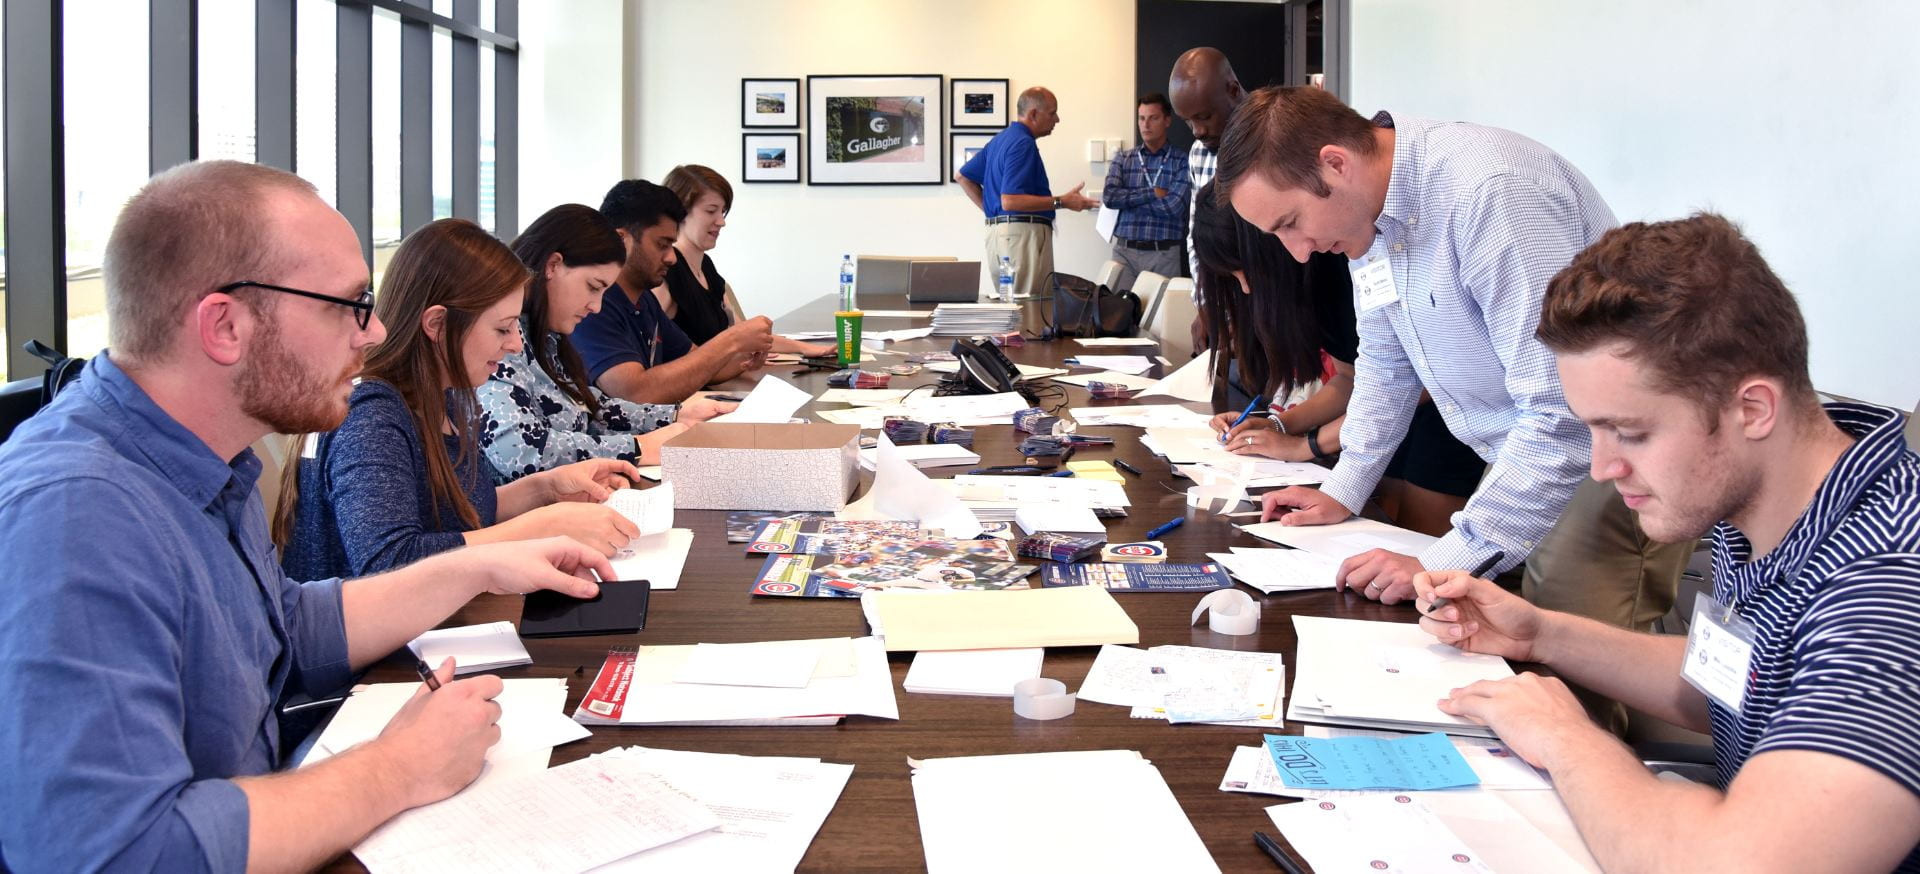 Anissa Patterson (seated fifth on the left) and DePaul sports business classmates review fan letters as part of a customer service consulting project for the Chicago Cubs baseball organization. (Photo by Kathy Hillegonds)